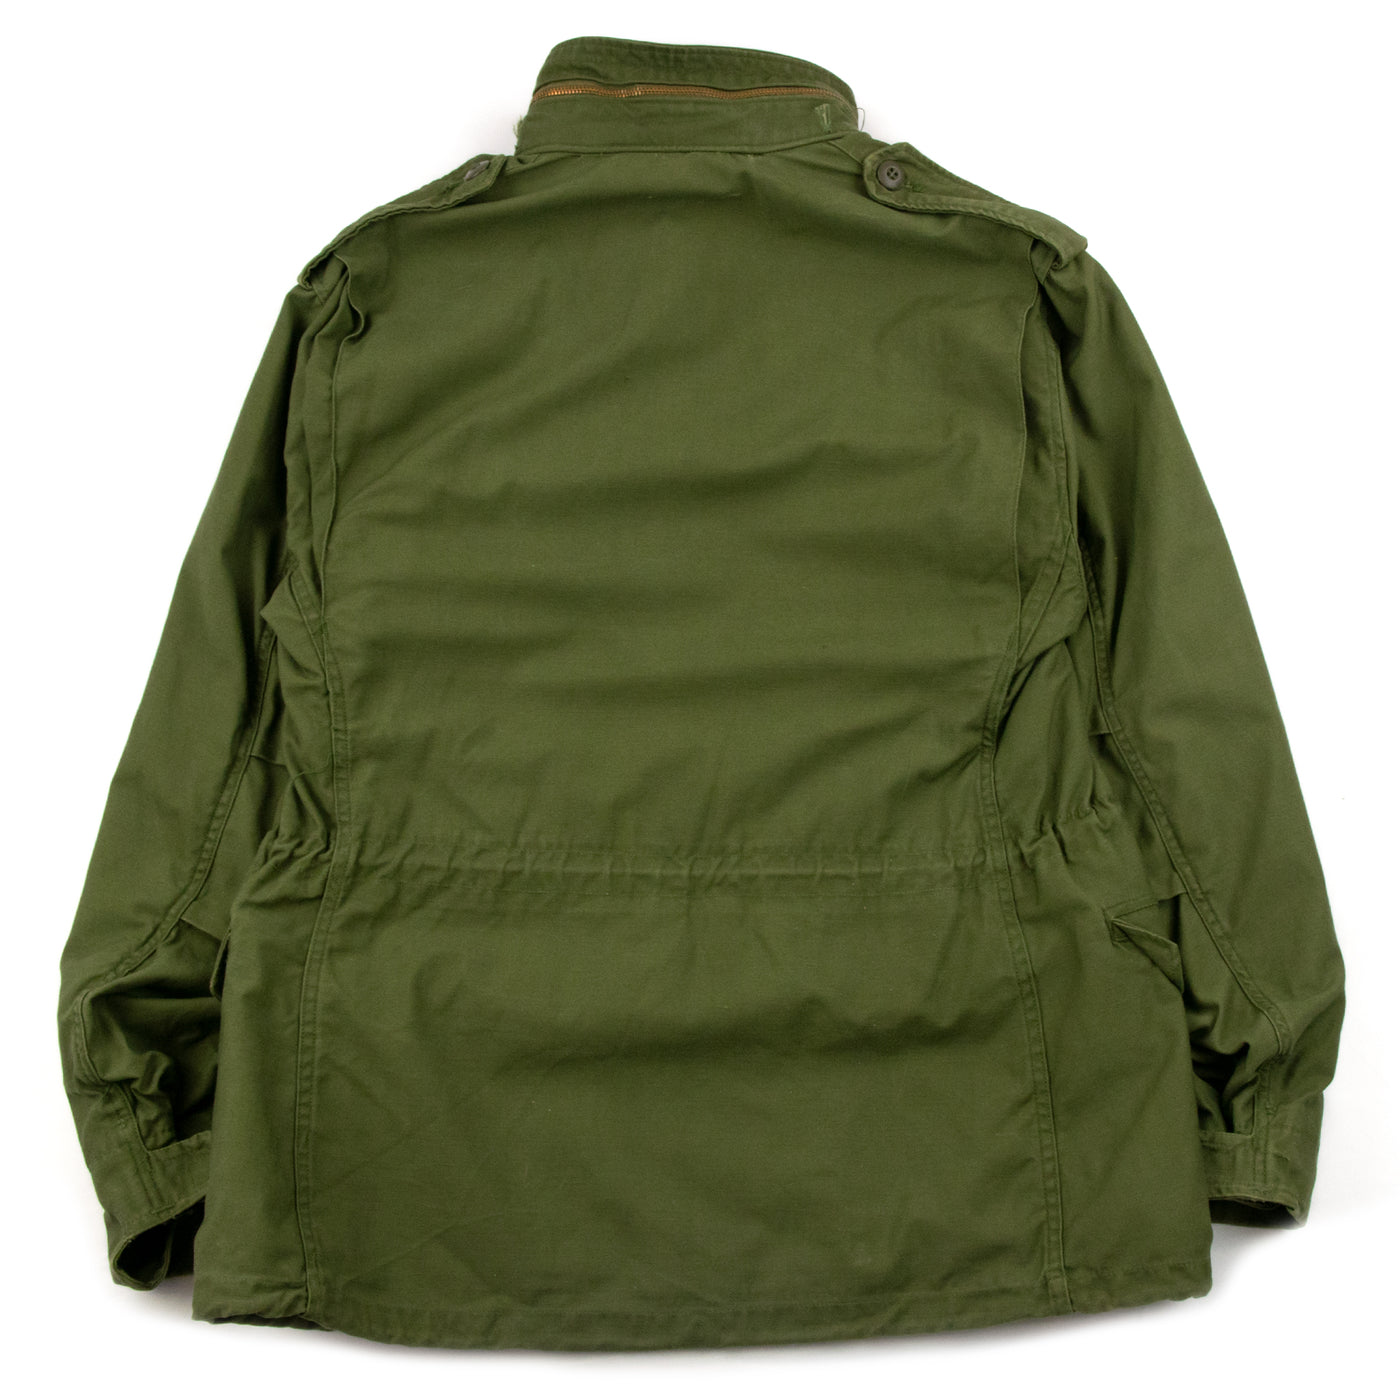 Vintage US Army Alpha Industries M-65 Cotton Sateen Military Field Jacket 0G-107 Green - M Back